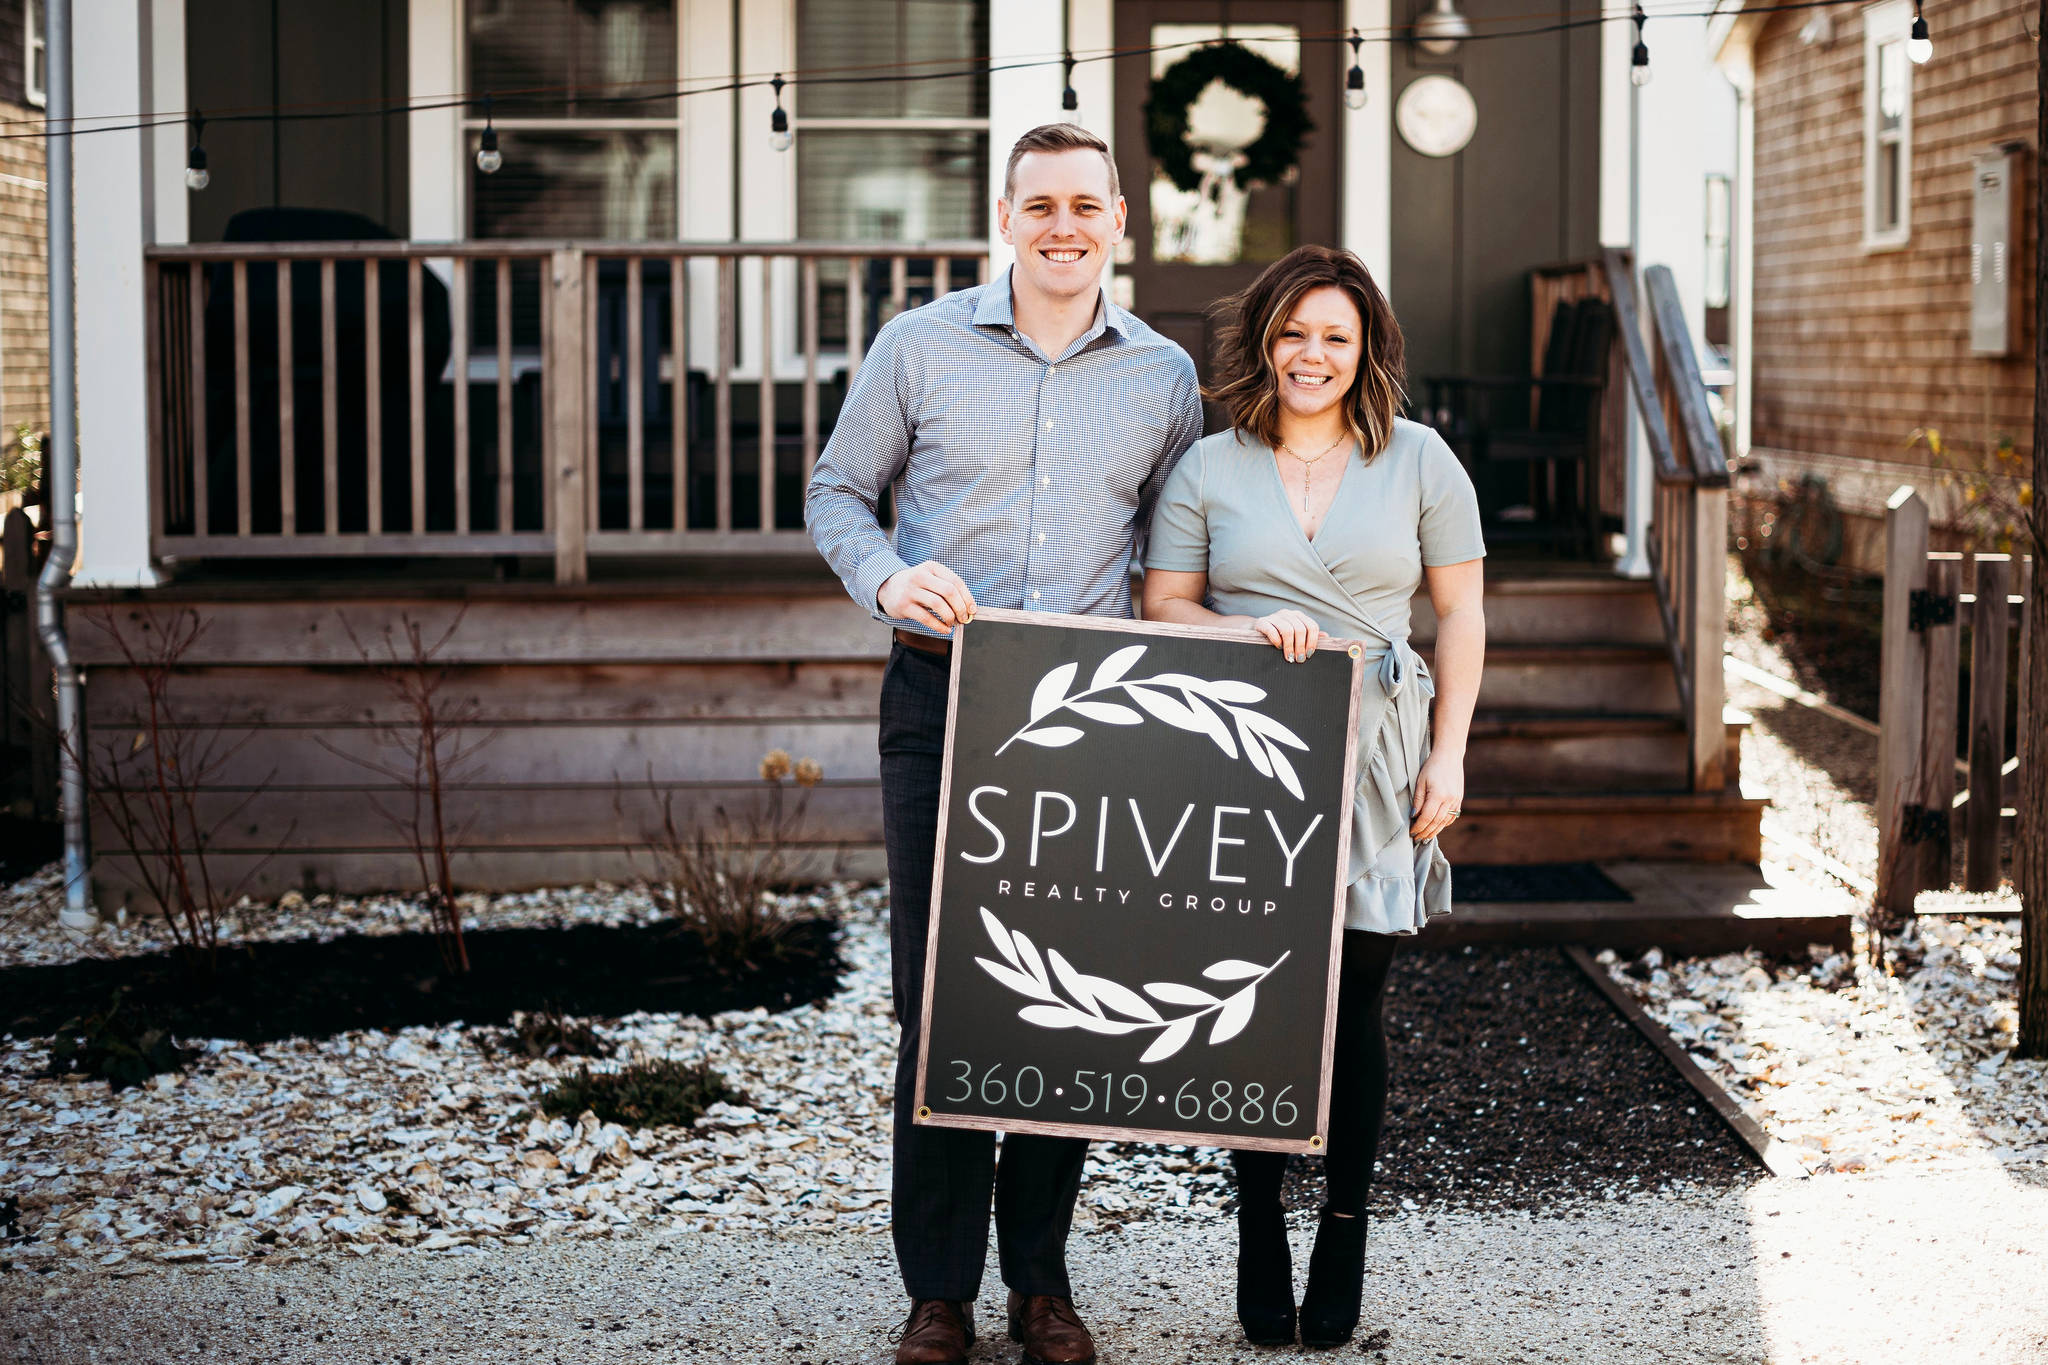 Spivey Realty Group